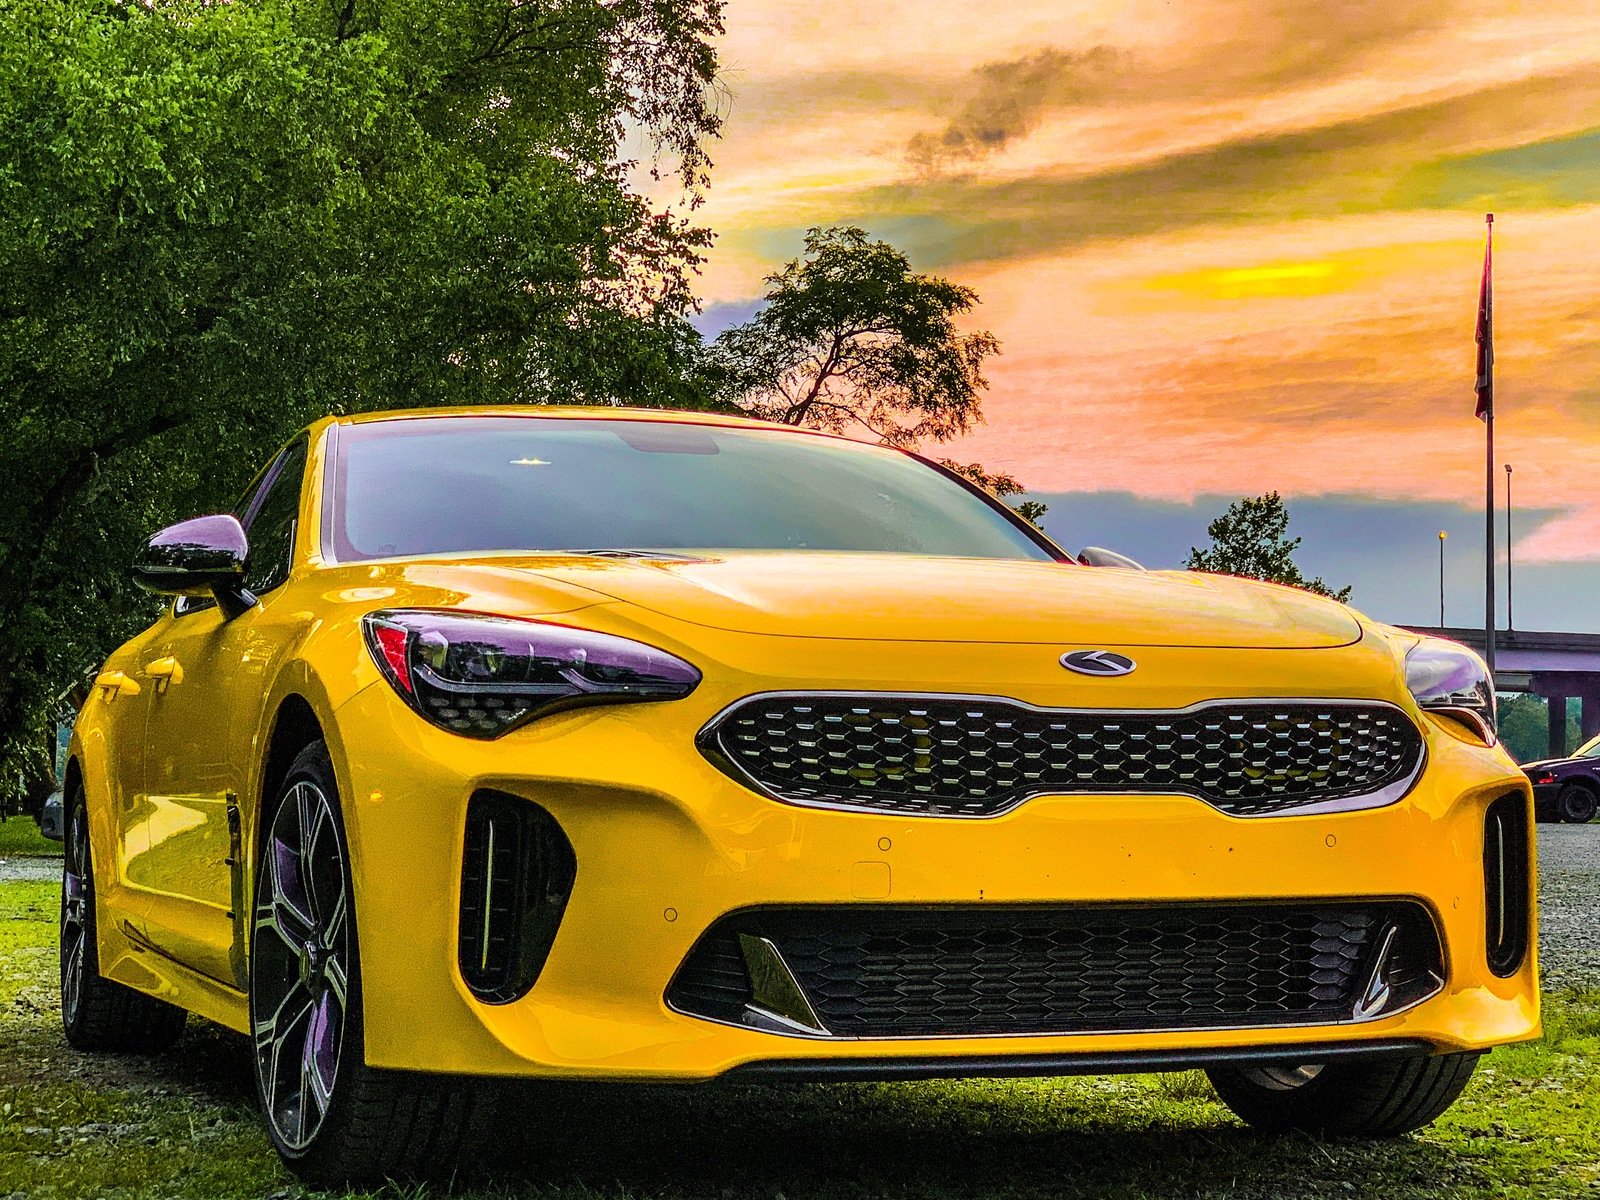 2018 Sunset Yellow Kia Stinger Gt Awd Picture, Mods, - Kia Stinger Gt Awd  Yellow - 1600x1200 Wallpaper 